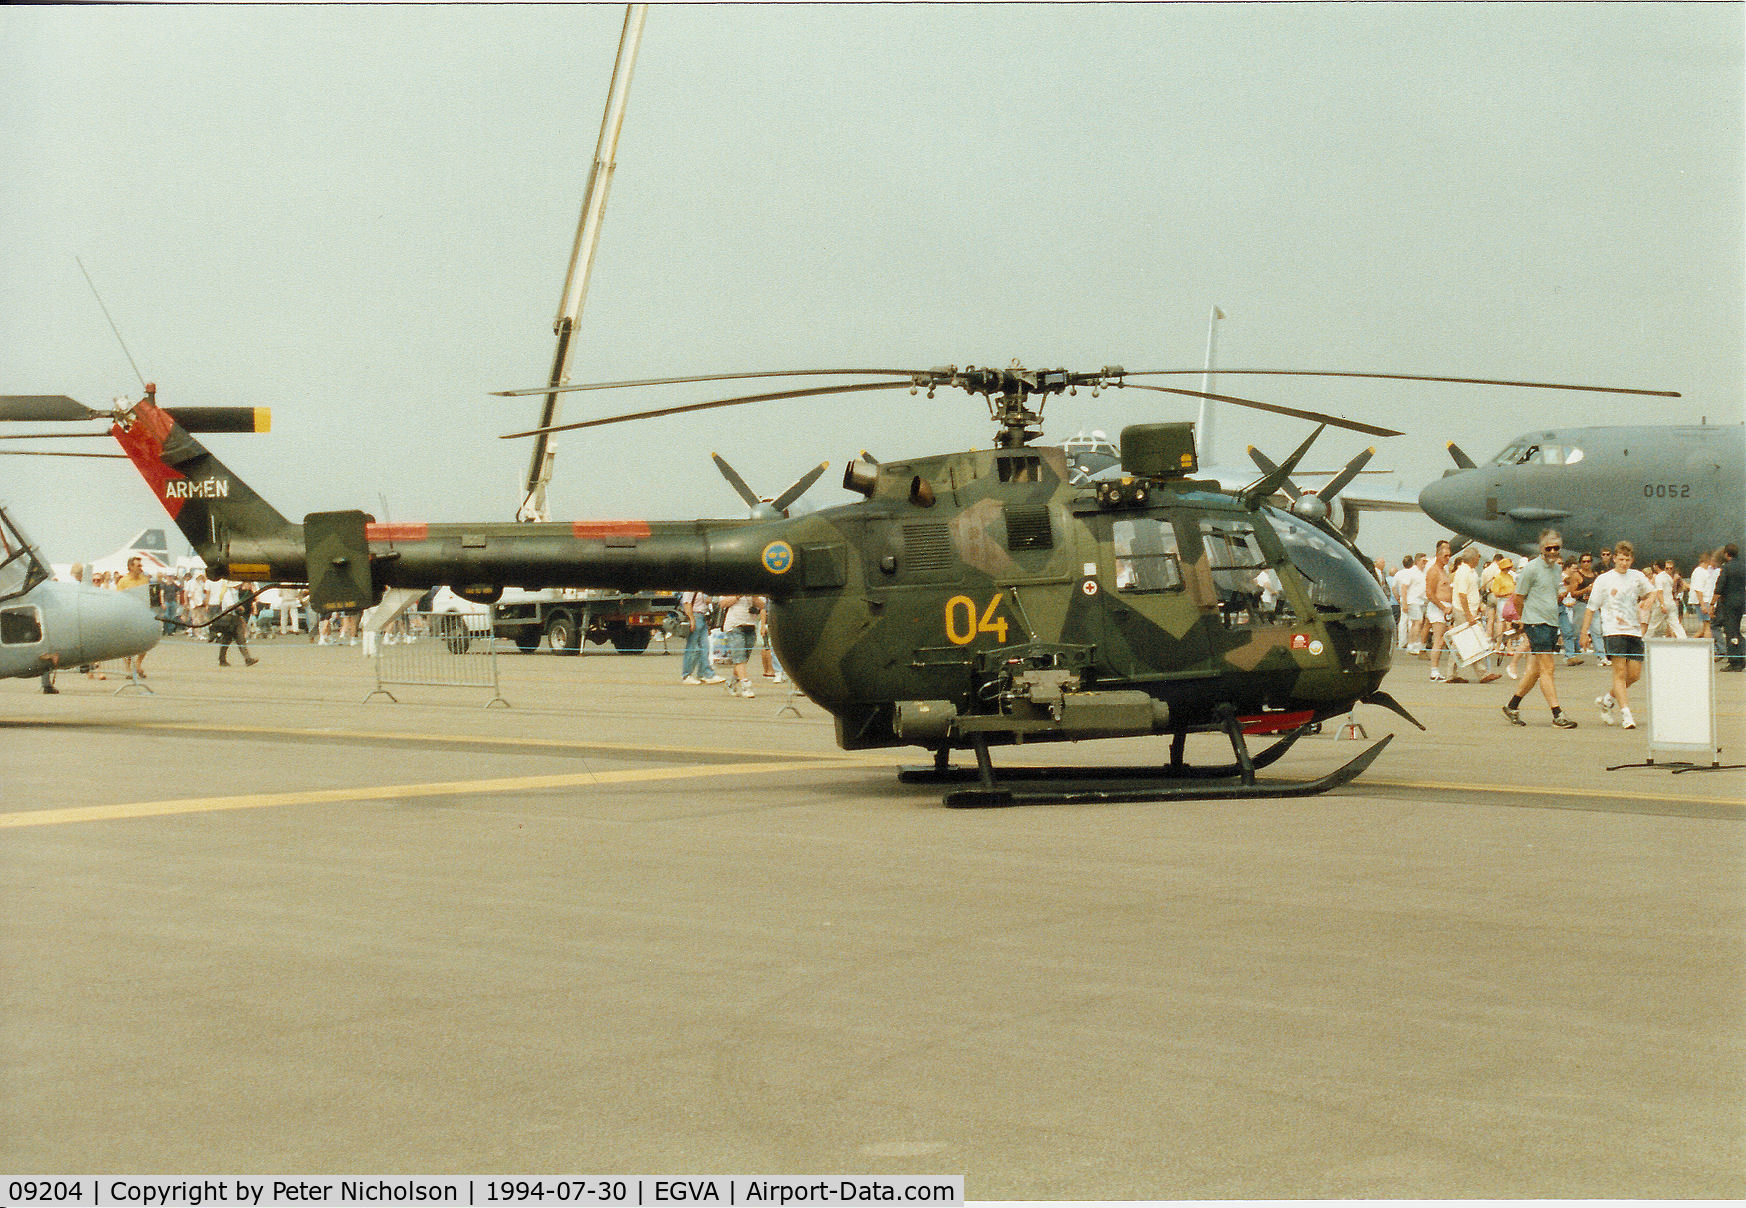 09204, MBB Hkp9A (Bo-105CB-3) C/N S-1754, Hkp-9a of the Royal Swedish Army on display at the 1994 Intnl Air Tattoo at RAF Fairford.